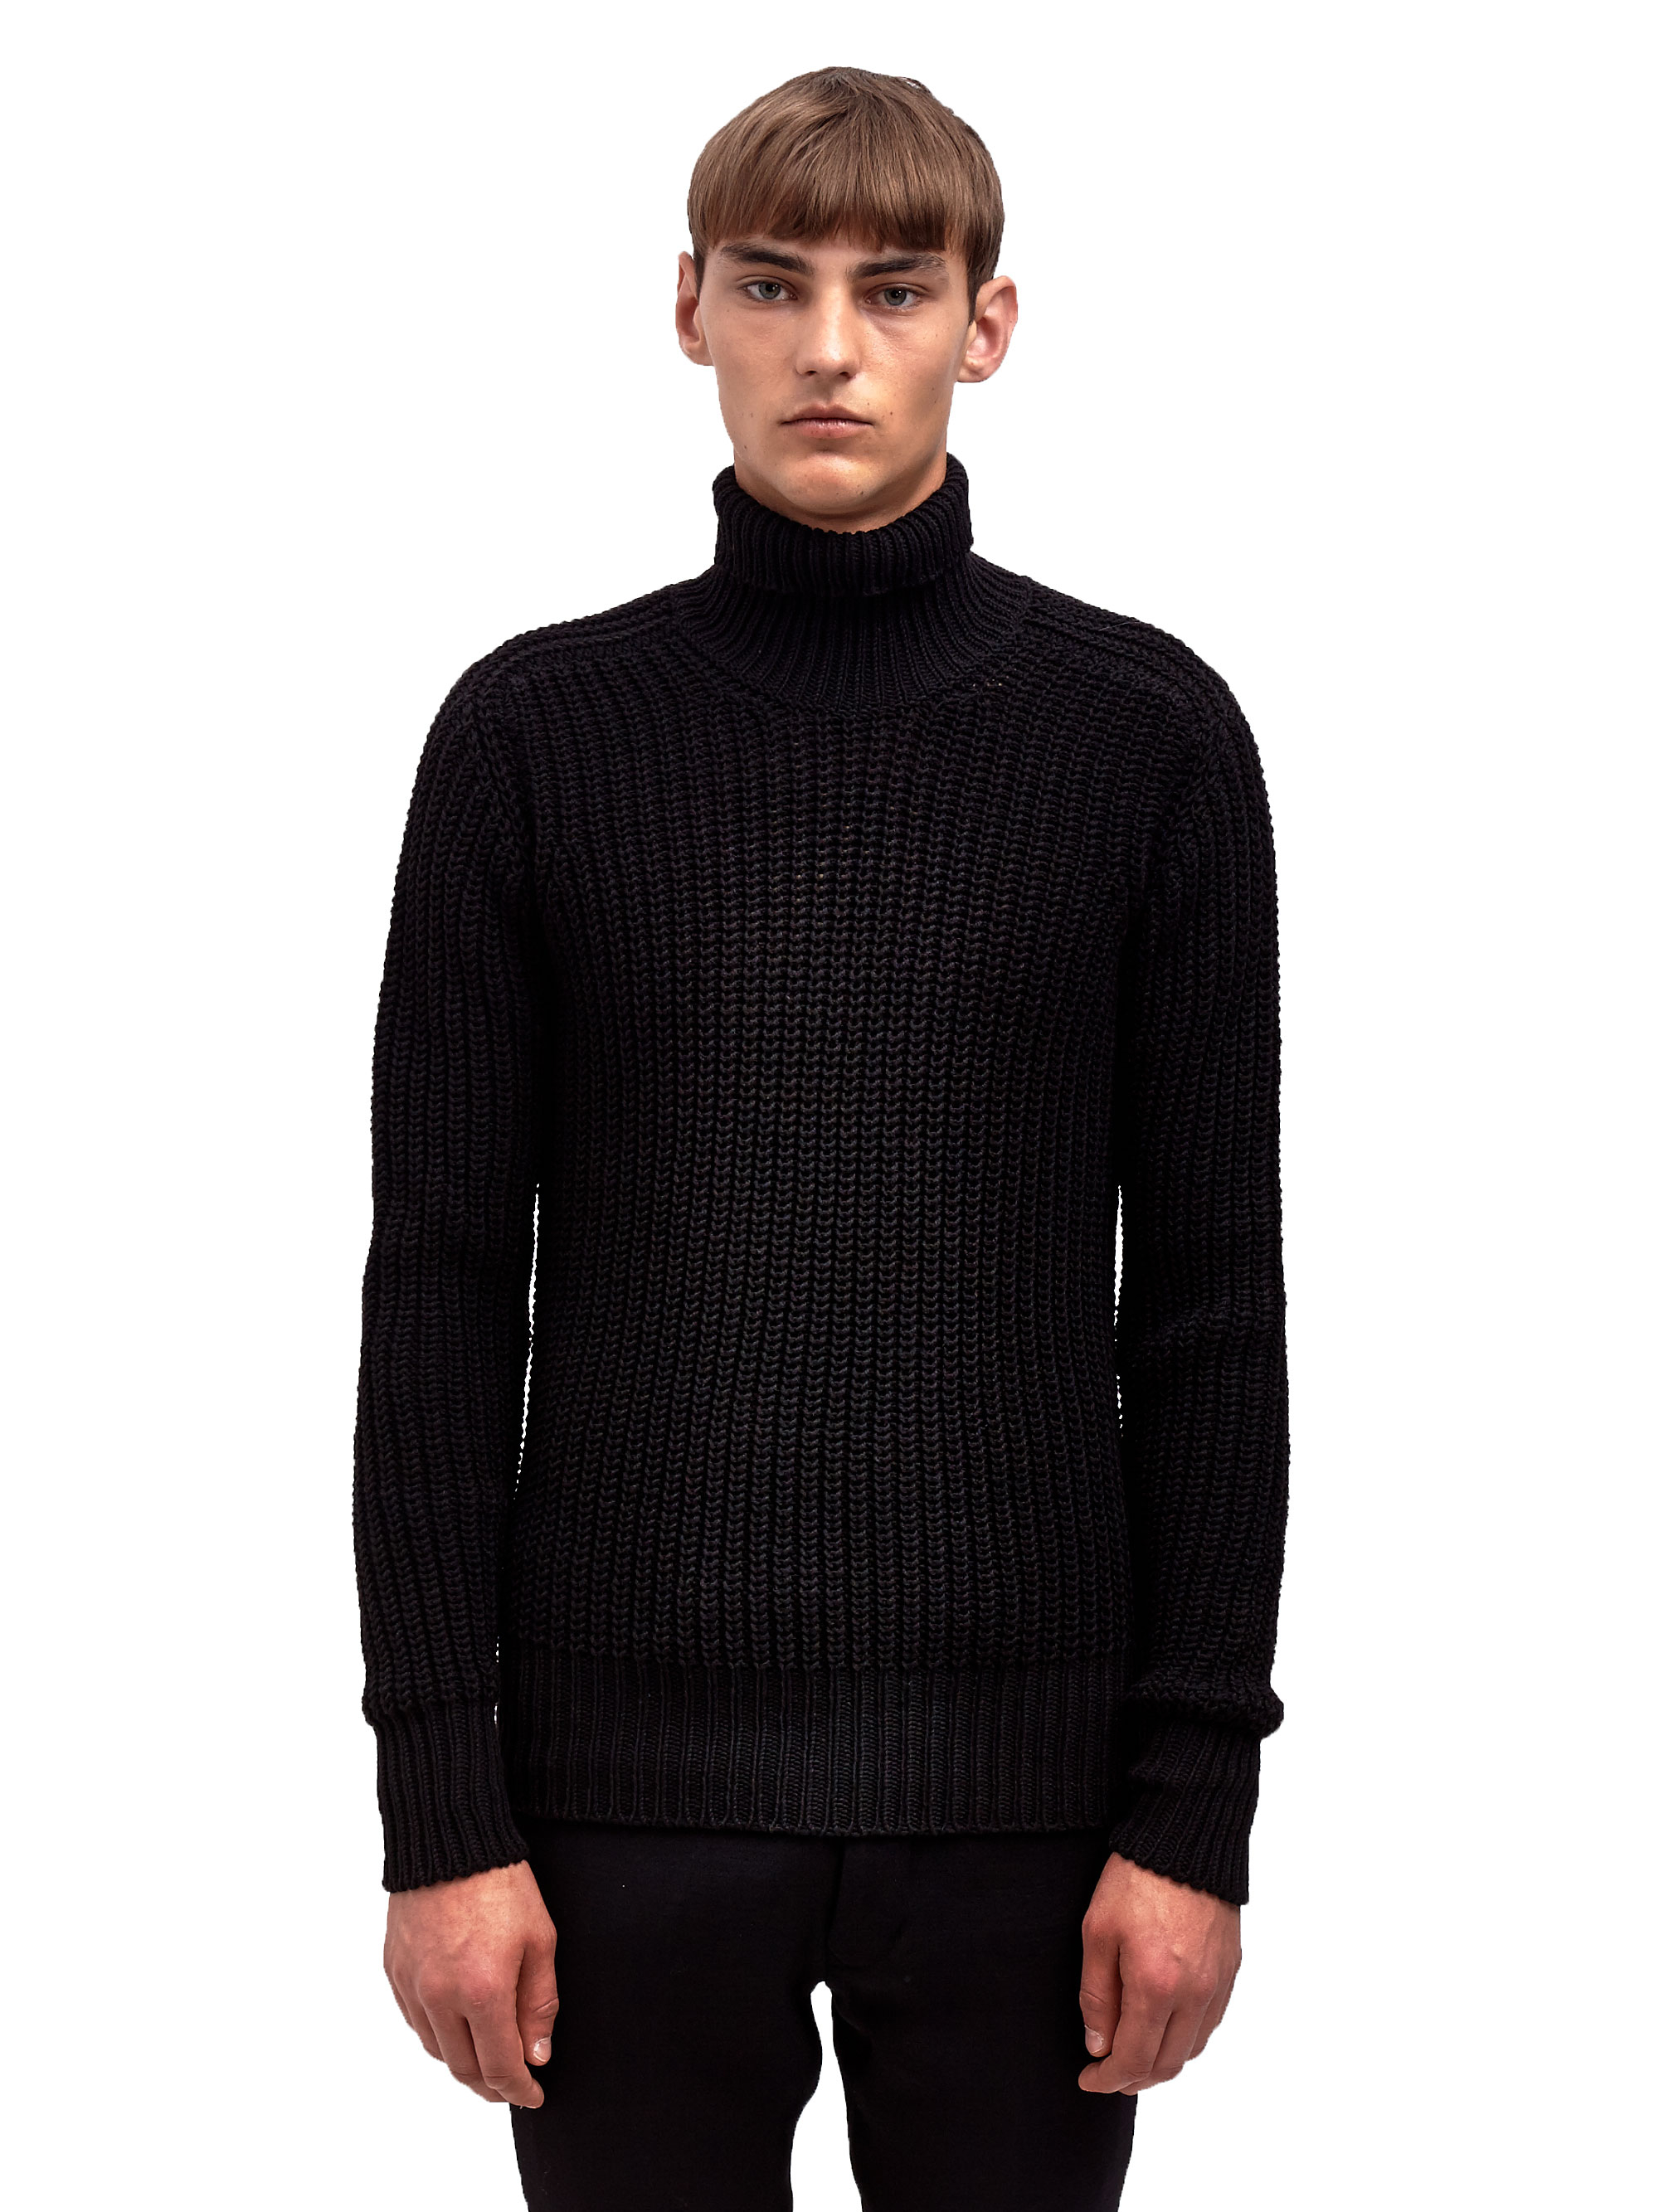 Lyst - Rick owens Mens High Neck Sweater in Black for Men